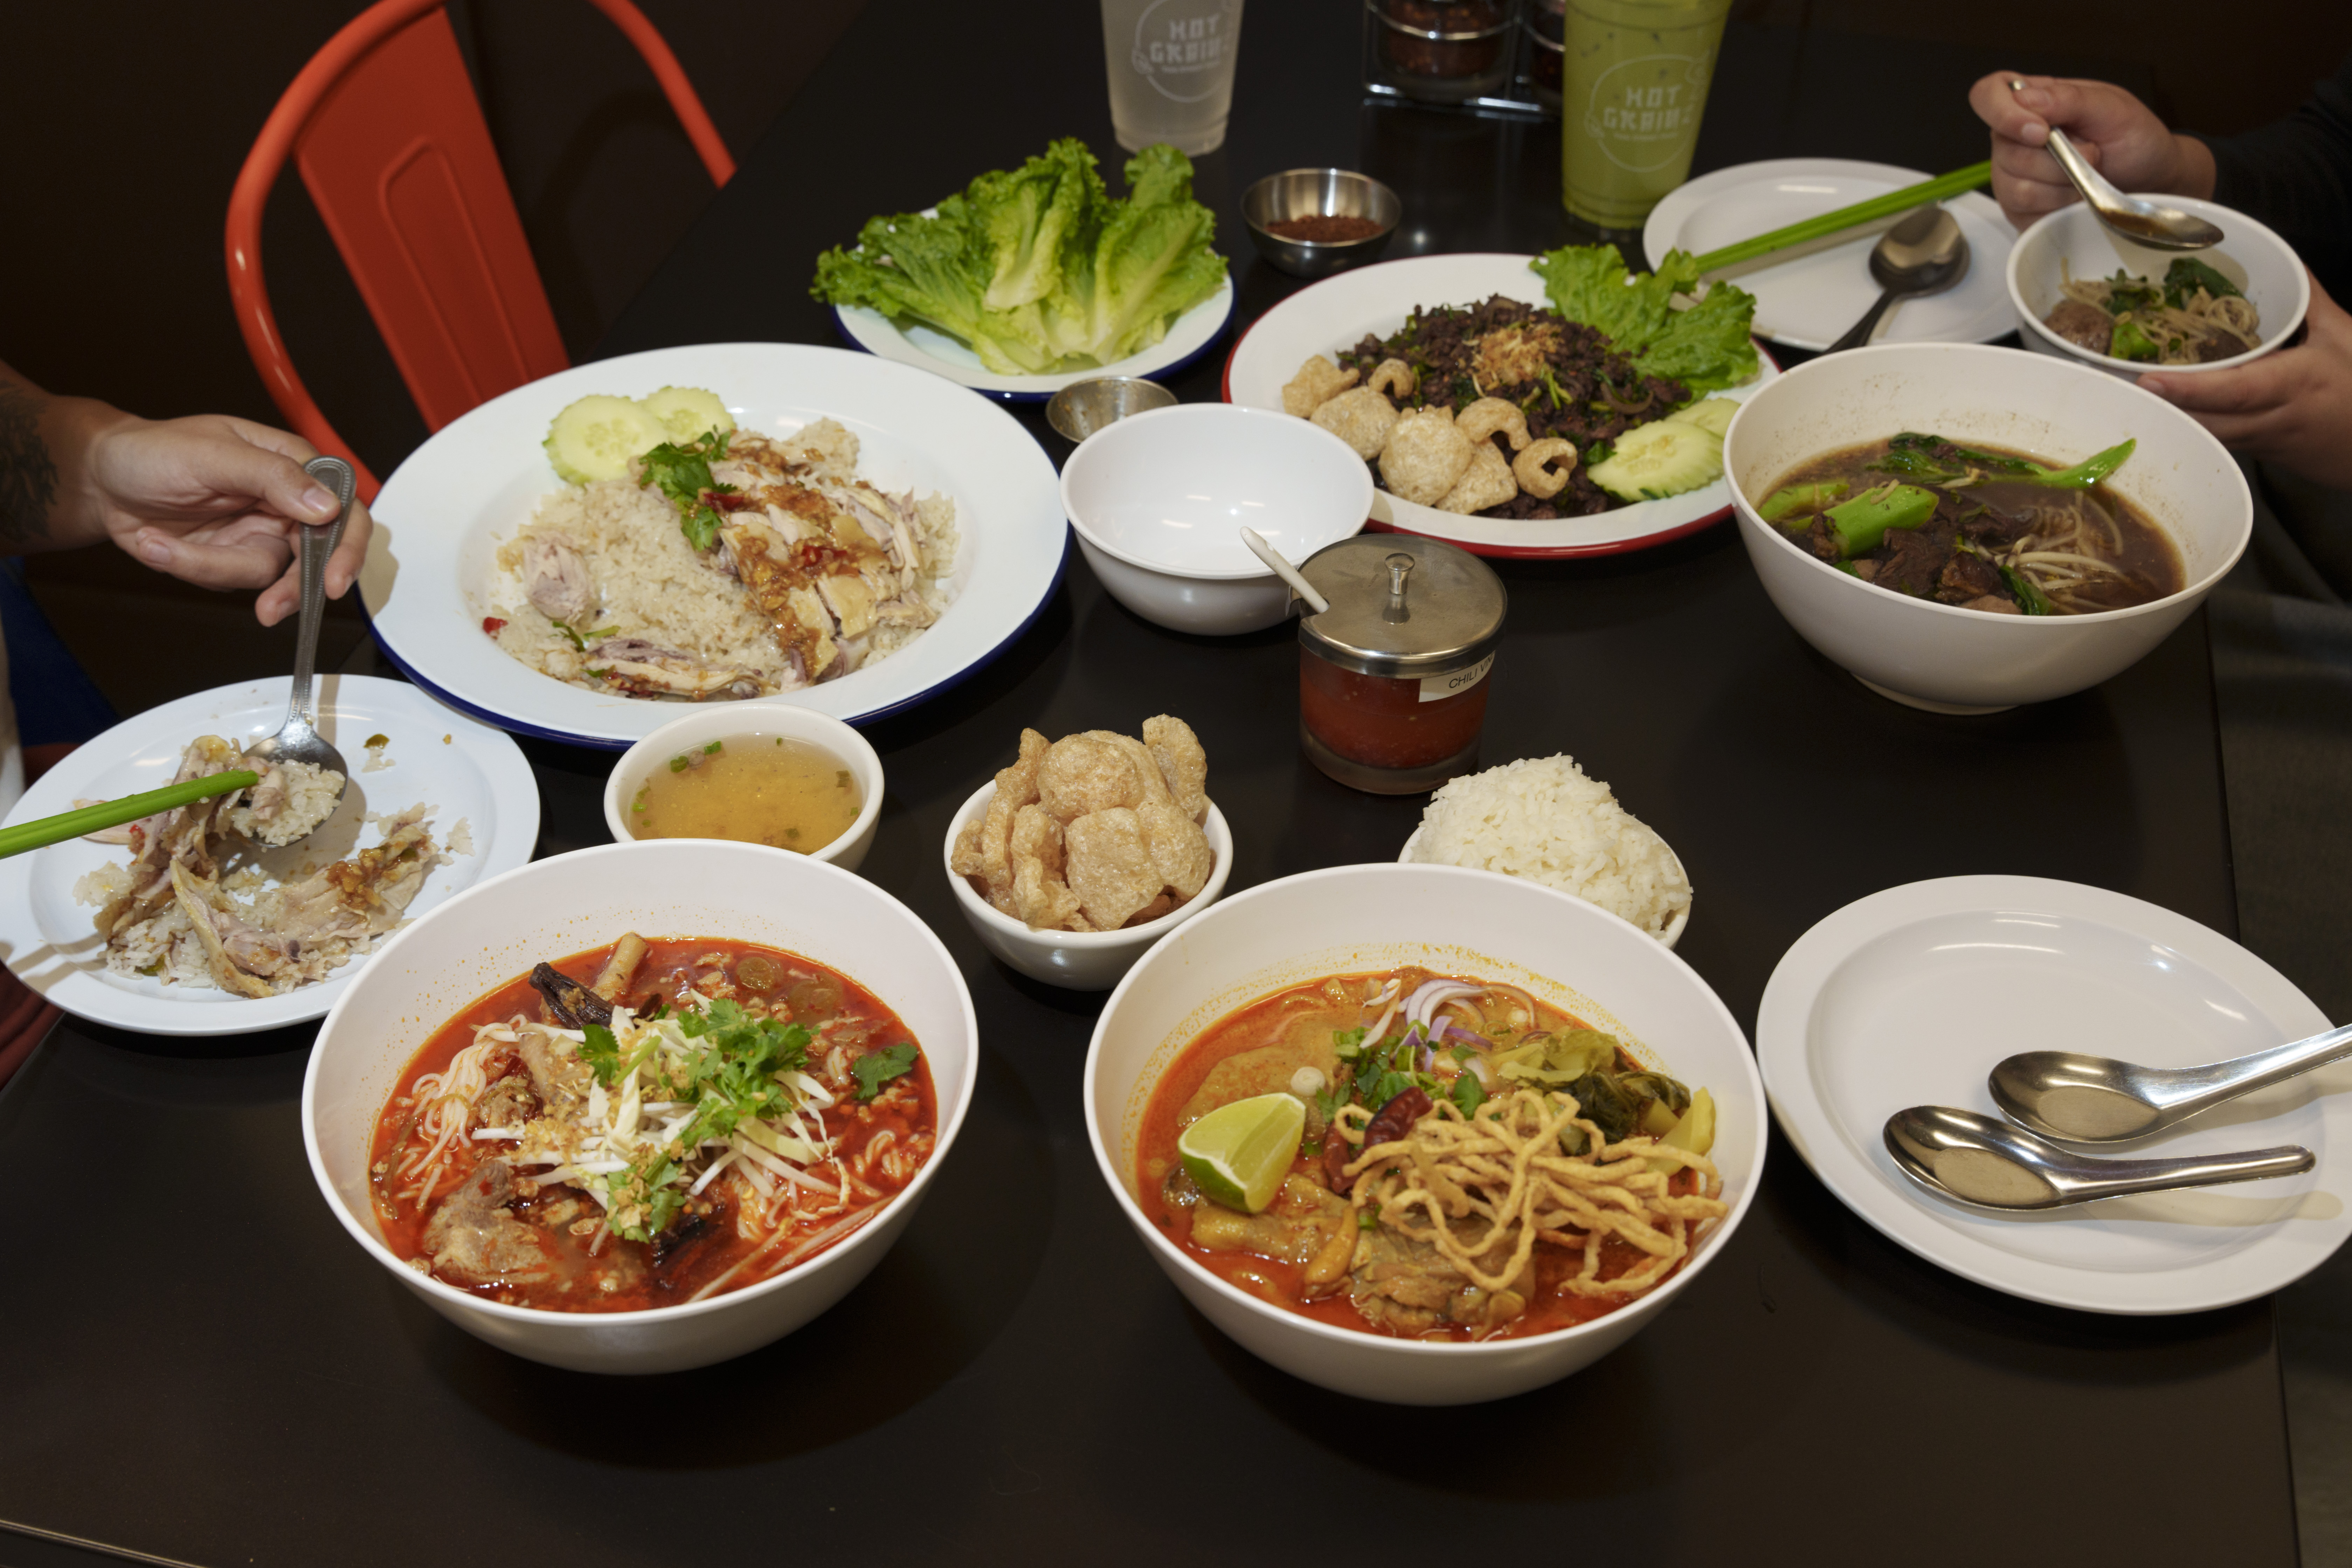 An assortment of white bowls and plates with various Thai foods on a black table, and two sets of hands holding utensils visible on either side.